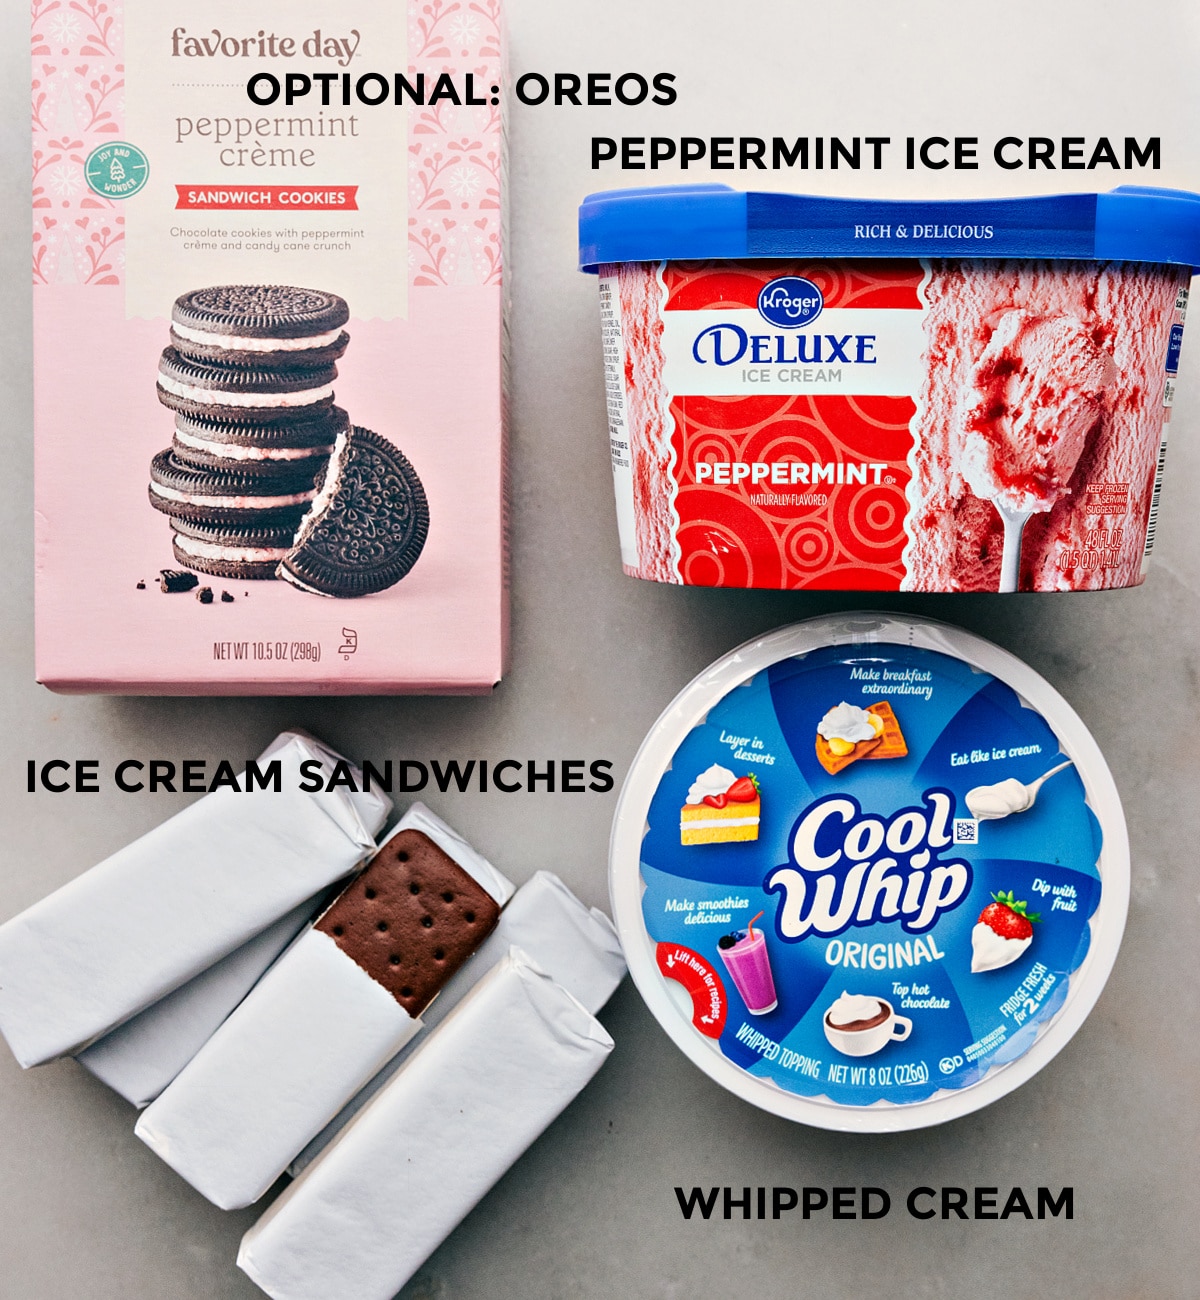 A collection of ingredients used in this no-bake treat, including the optional addition of Oreos as a topping.